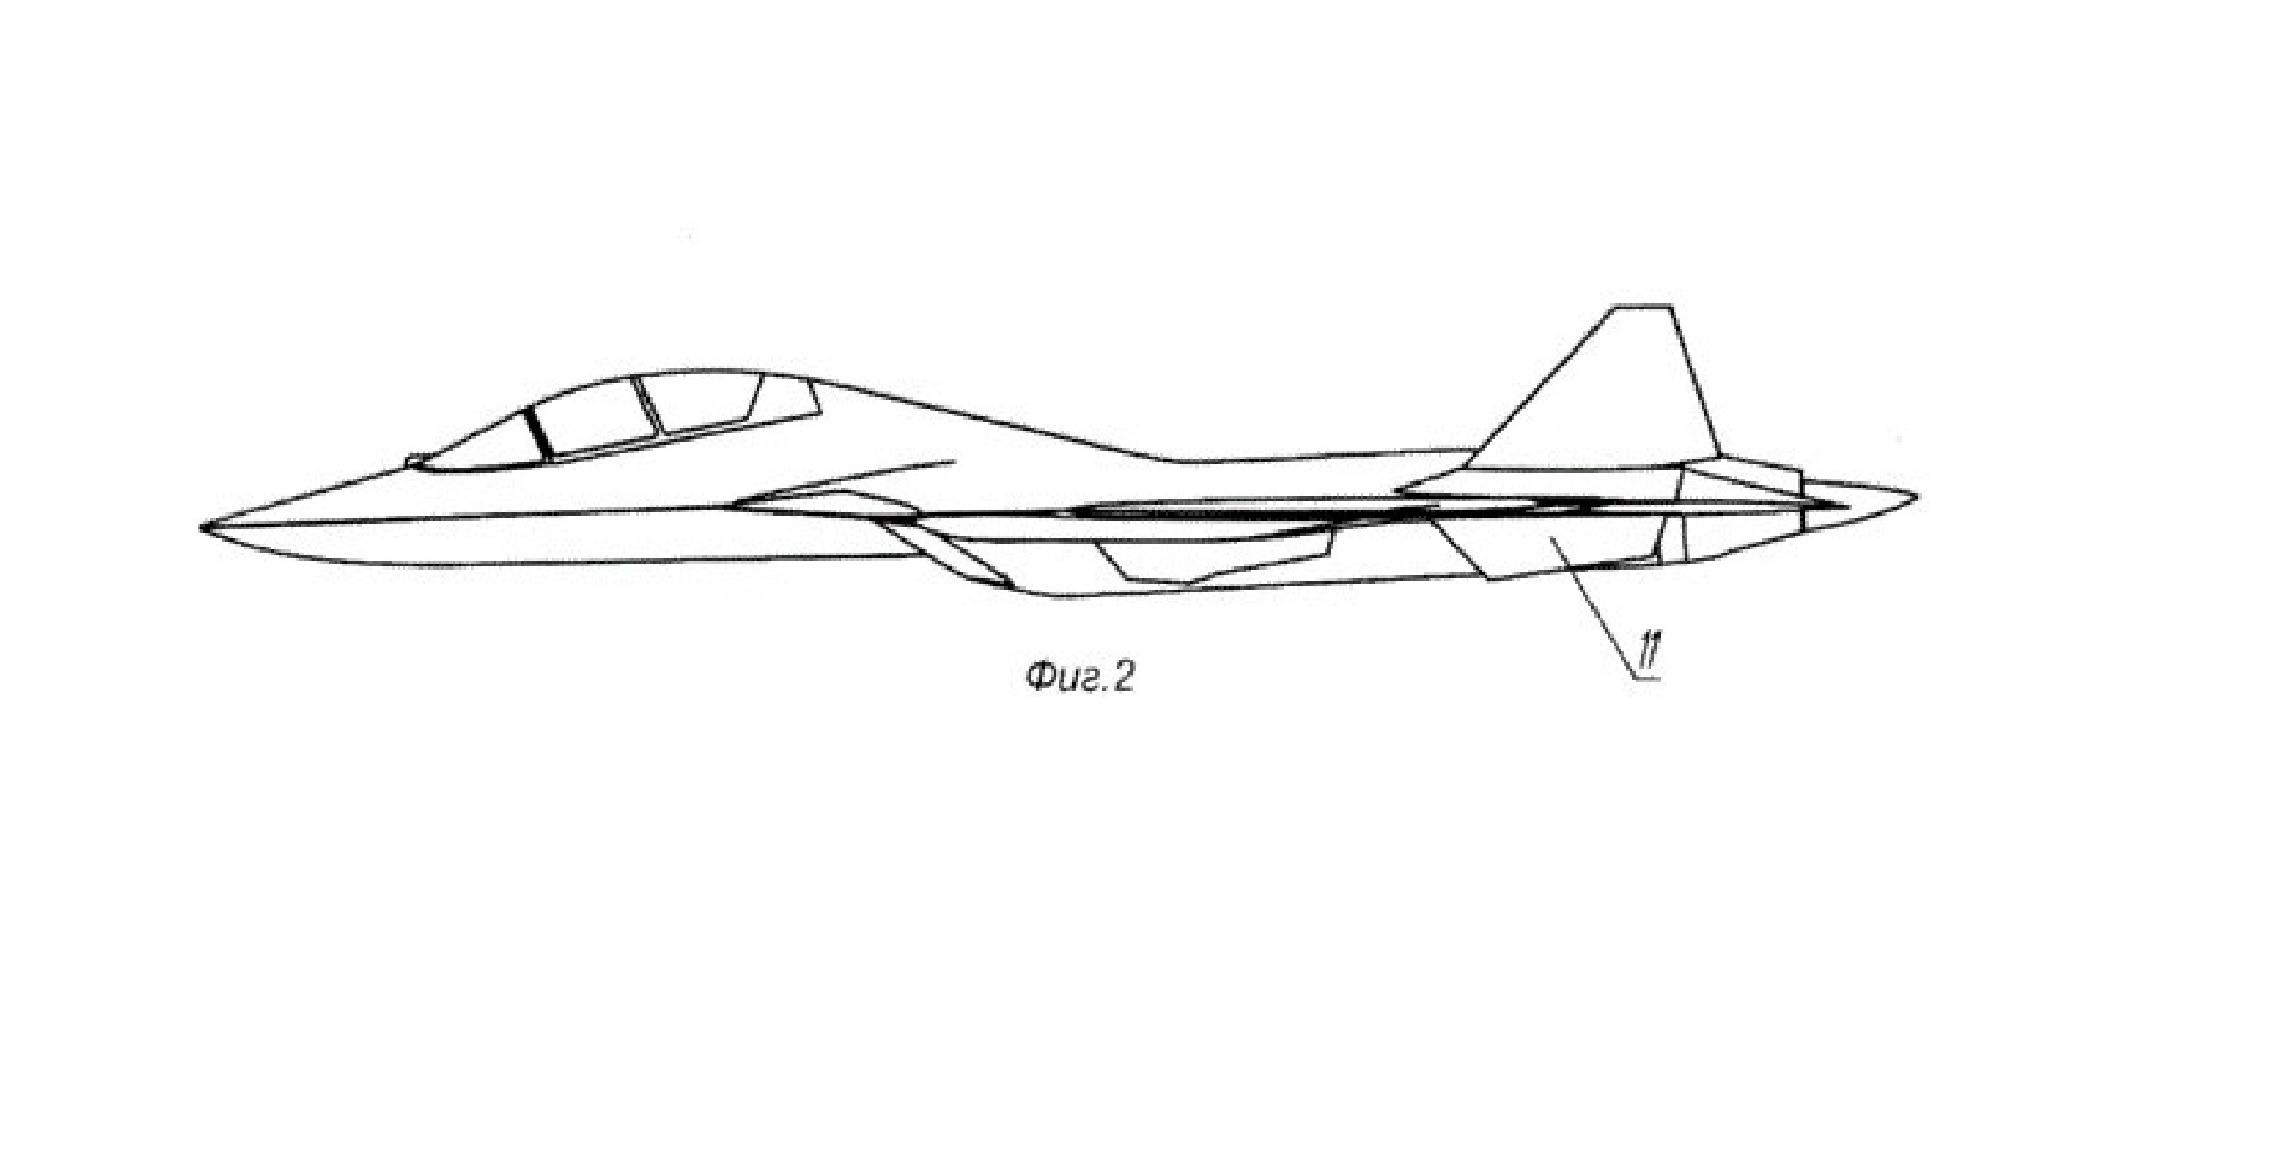 India's Stealthy Unmanned Combat Air Vehicle Demonstrator Breaks Cover  (Updated)